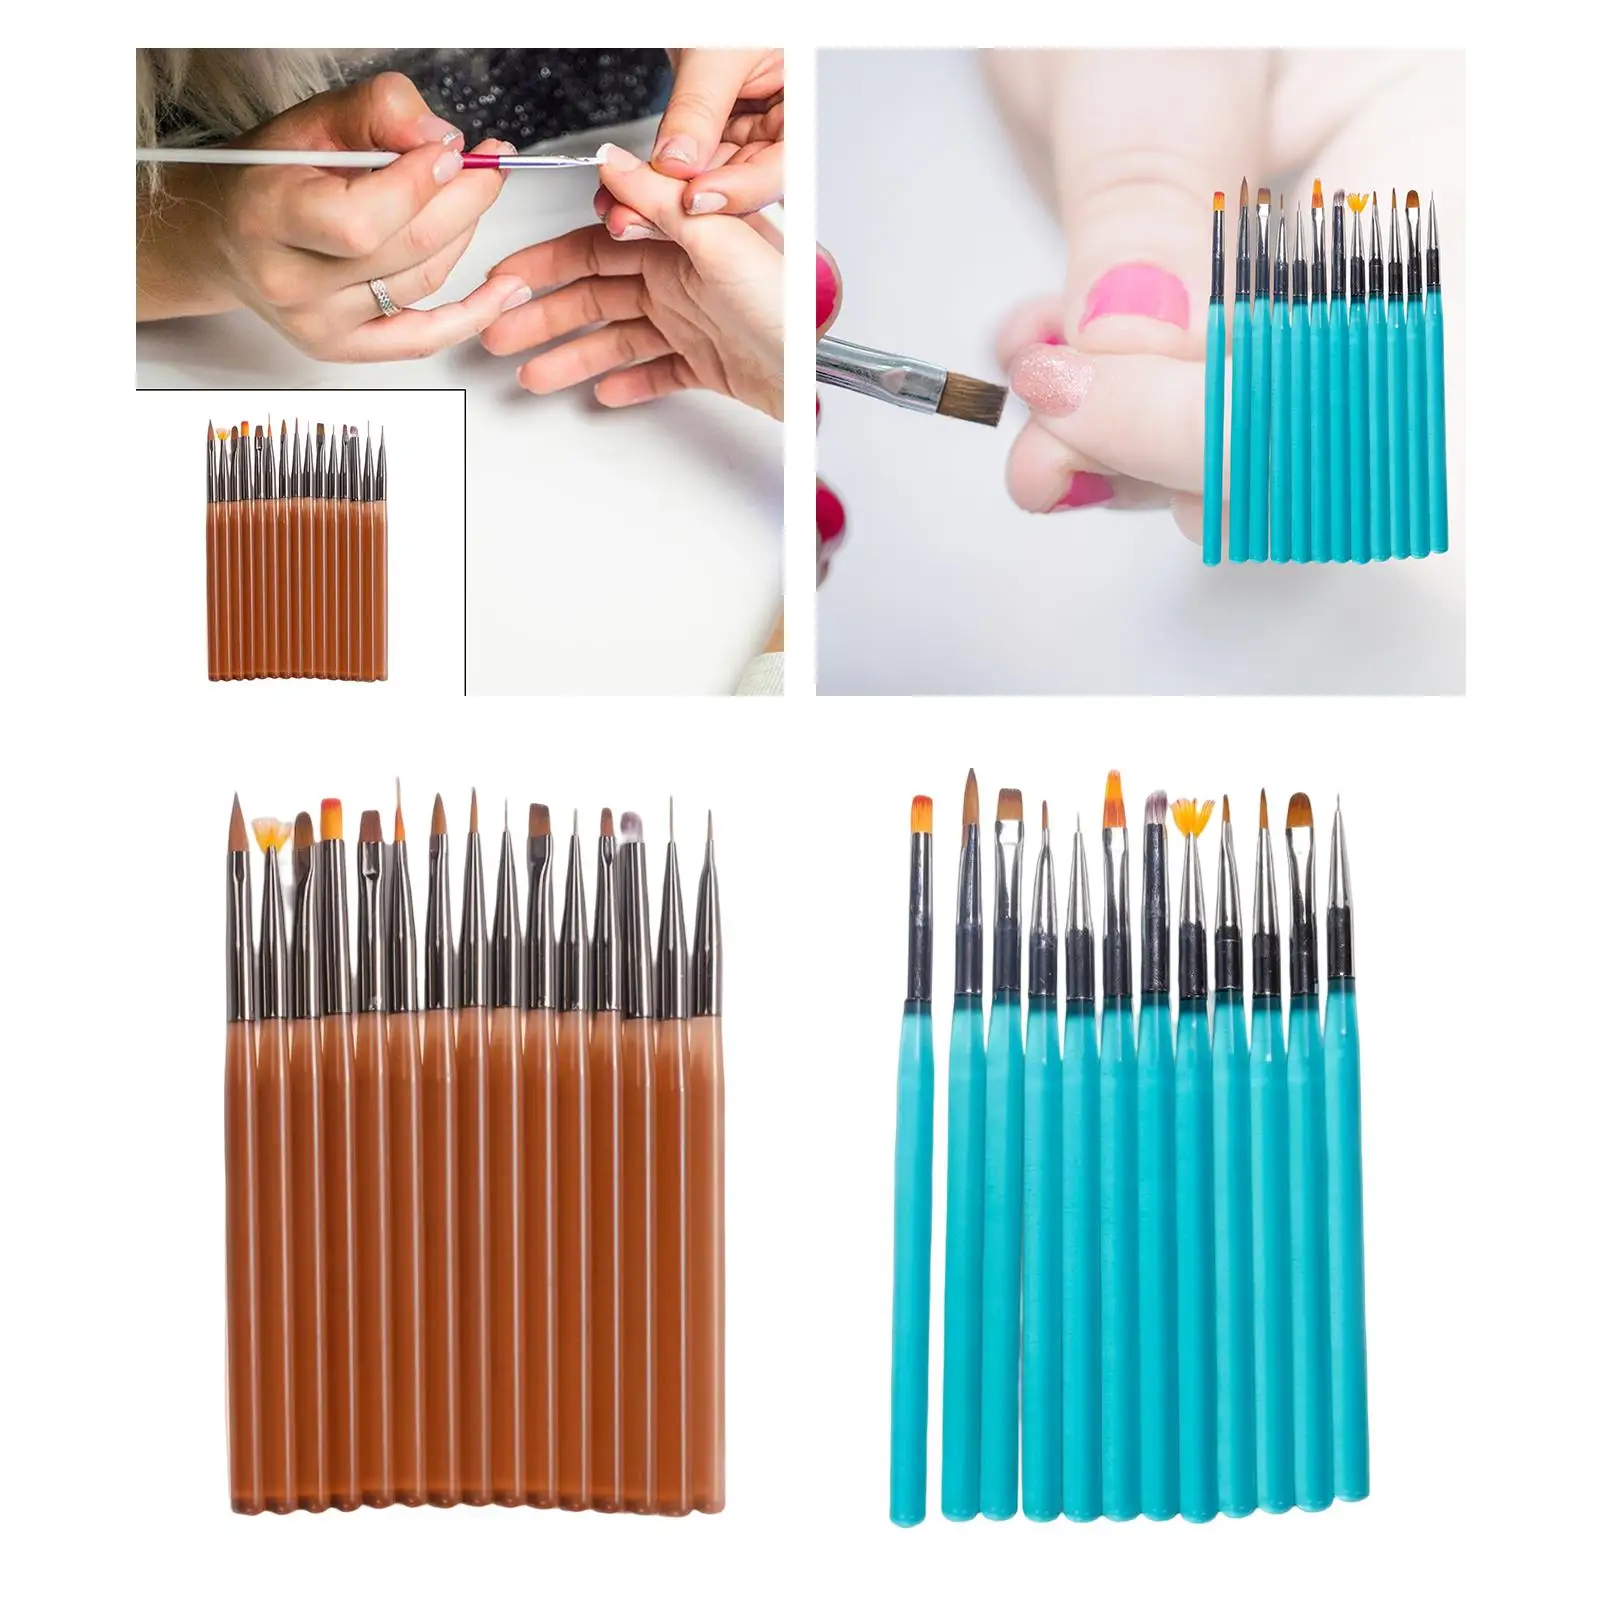 Nail Art Brushes Set Painting Tools for Women Girls Lightweight for Home